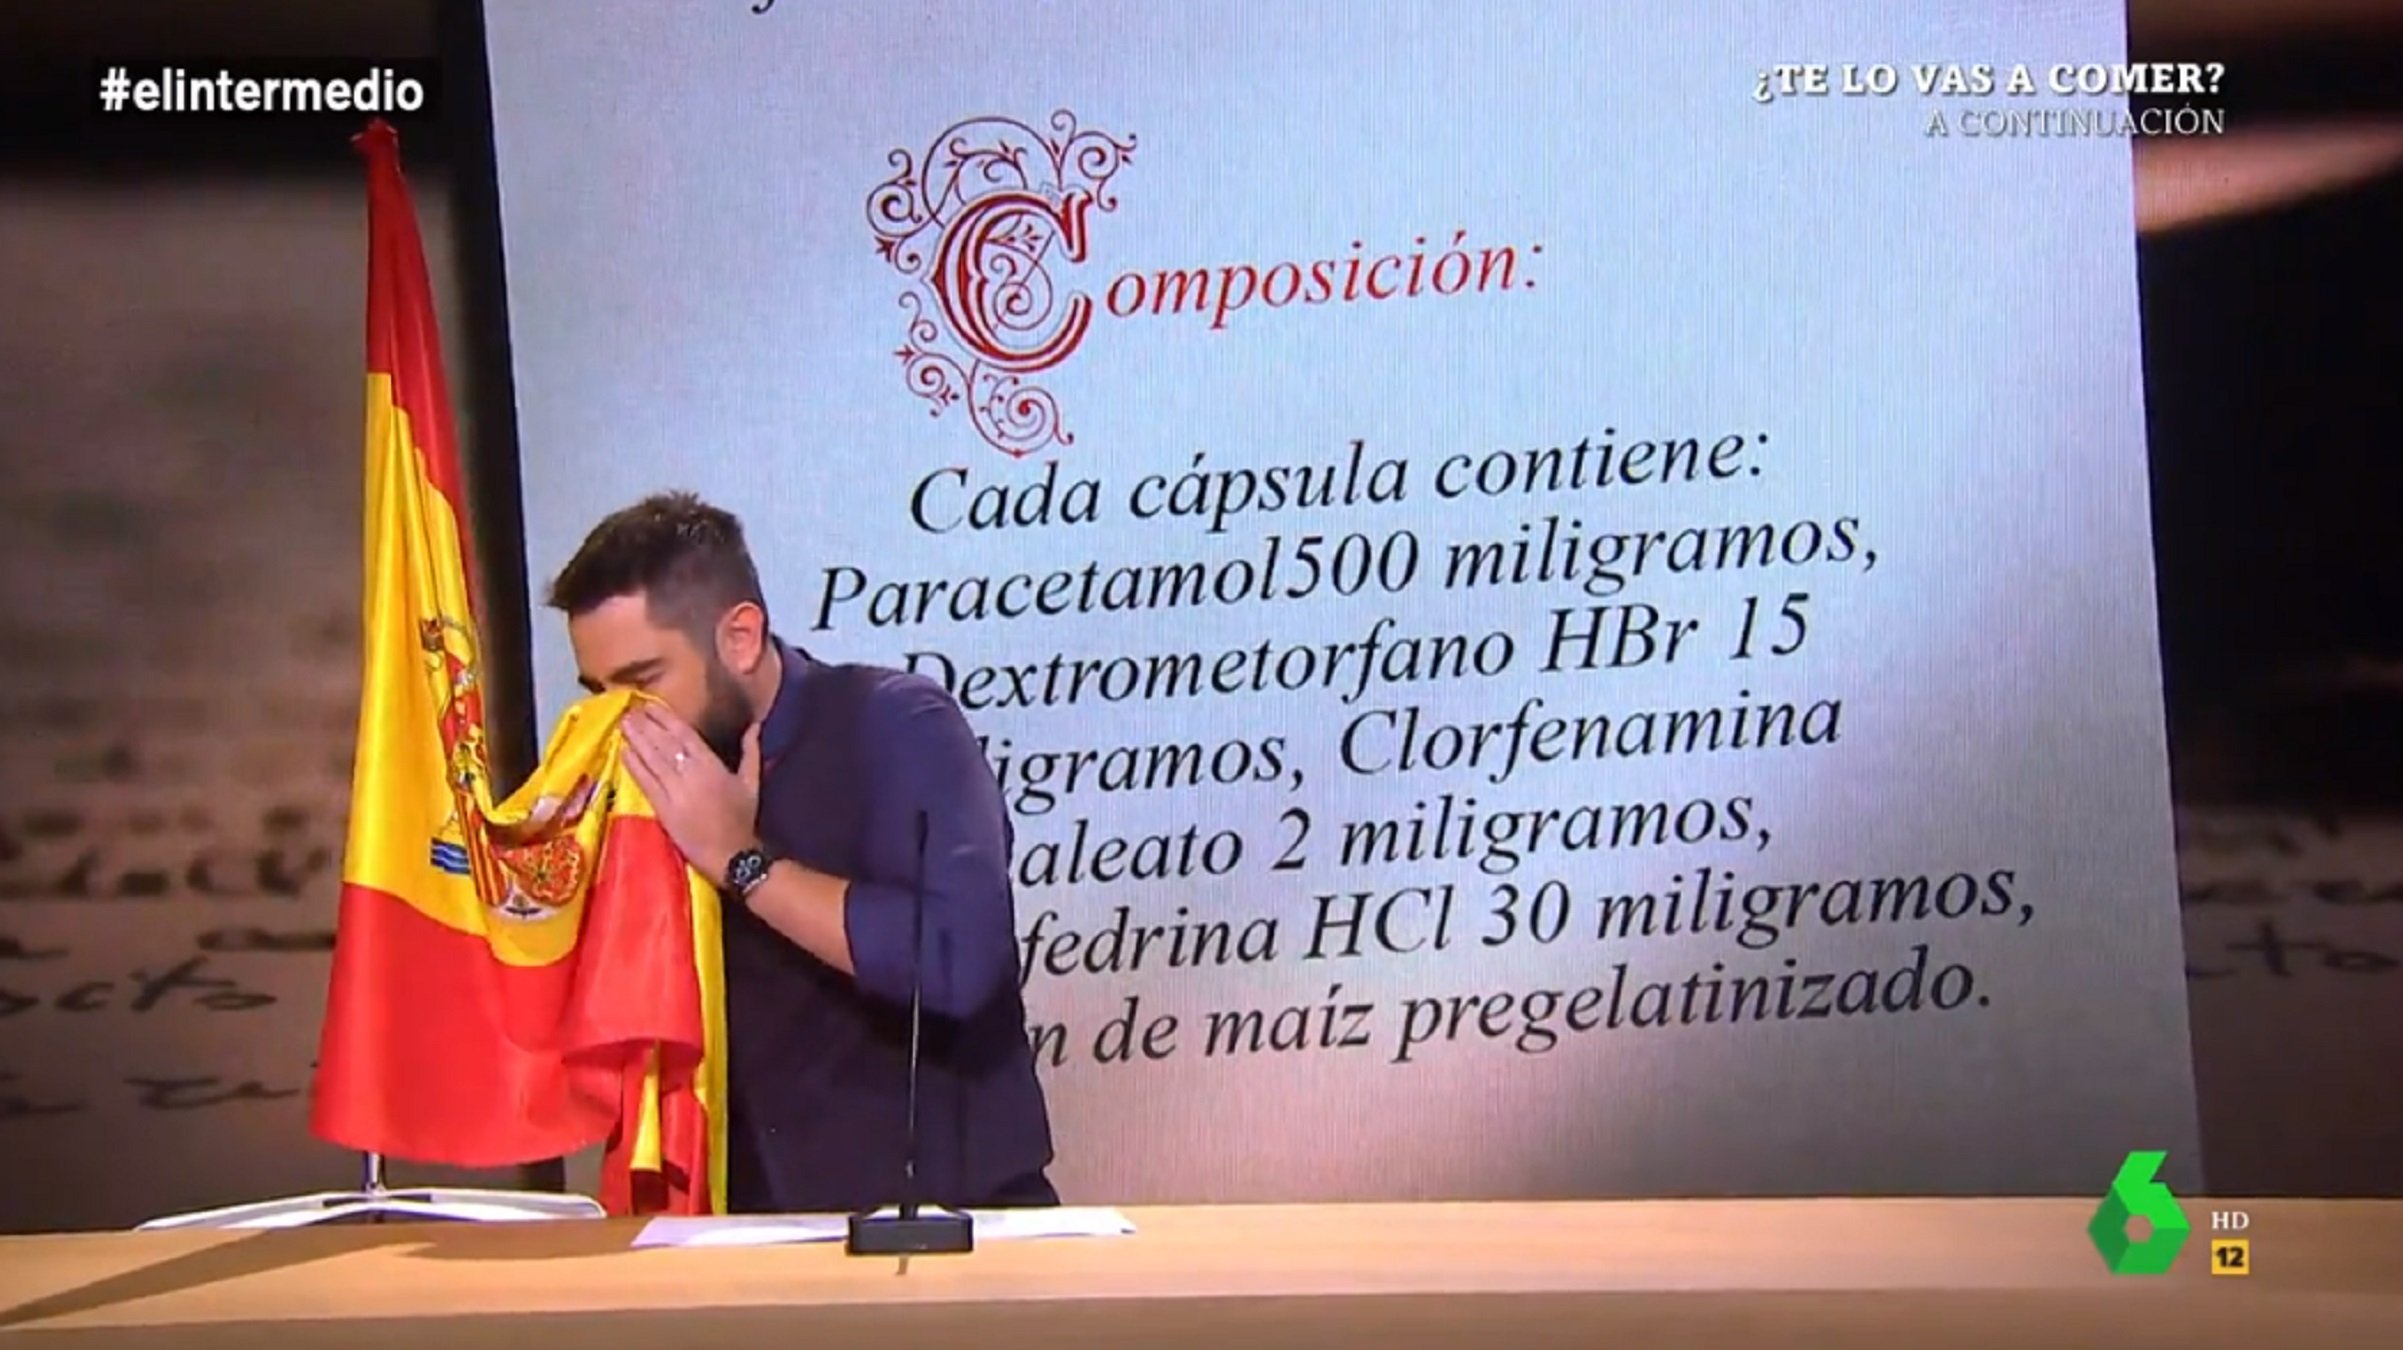 Spanish comedian summonsed to court for blowing his nose on the Spanish flag